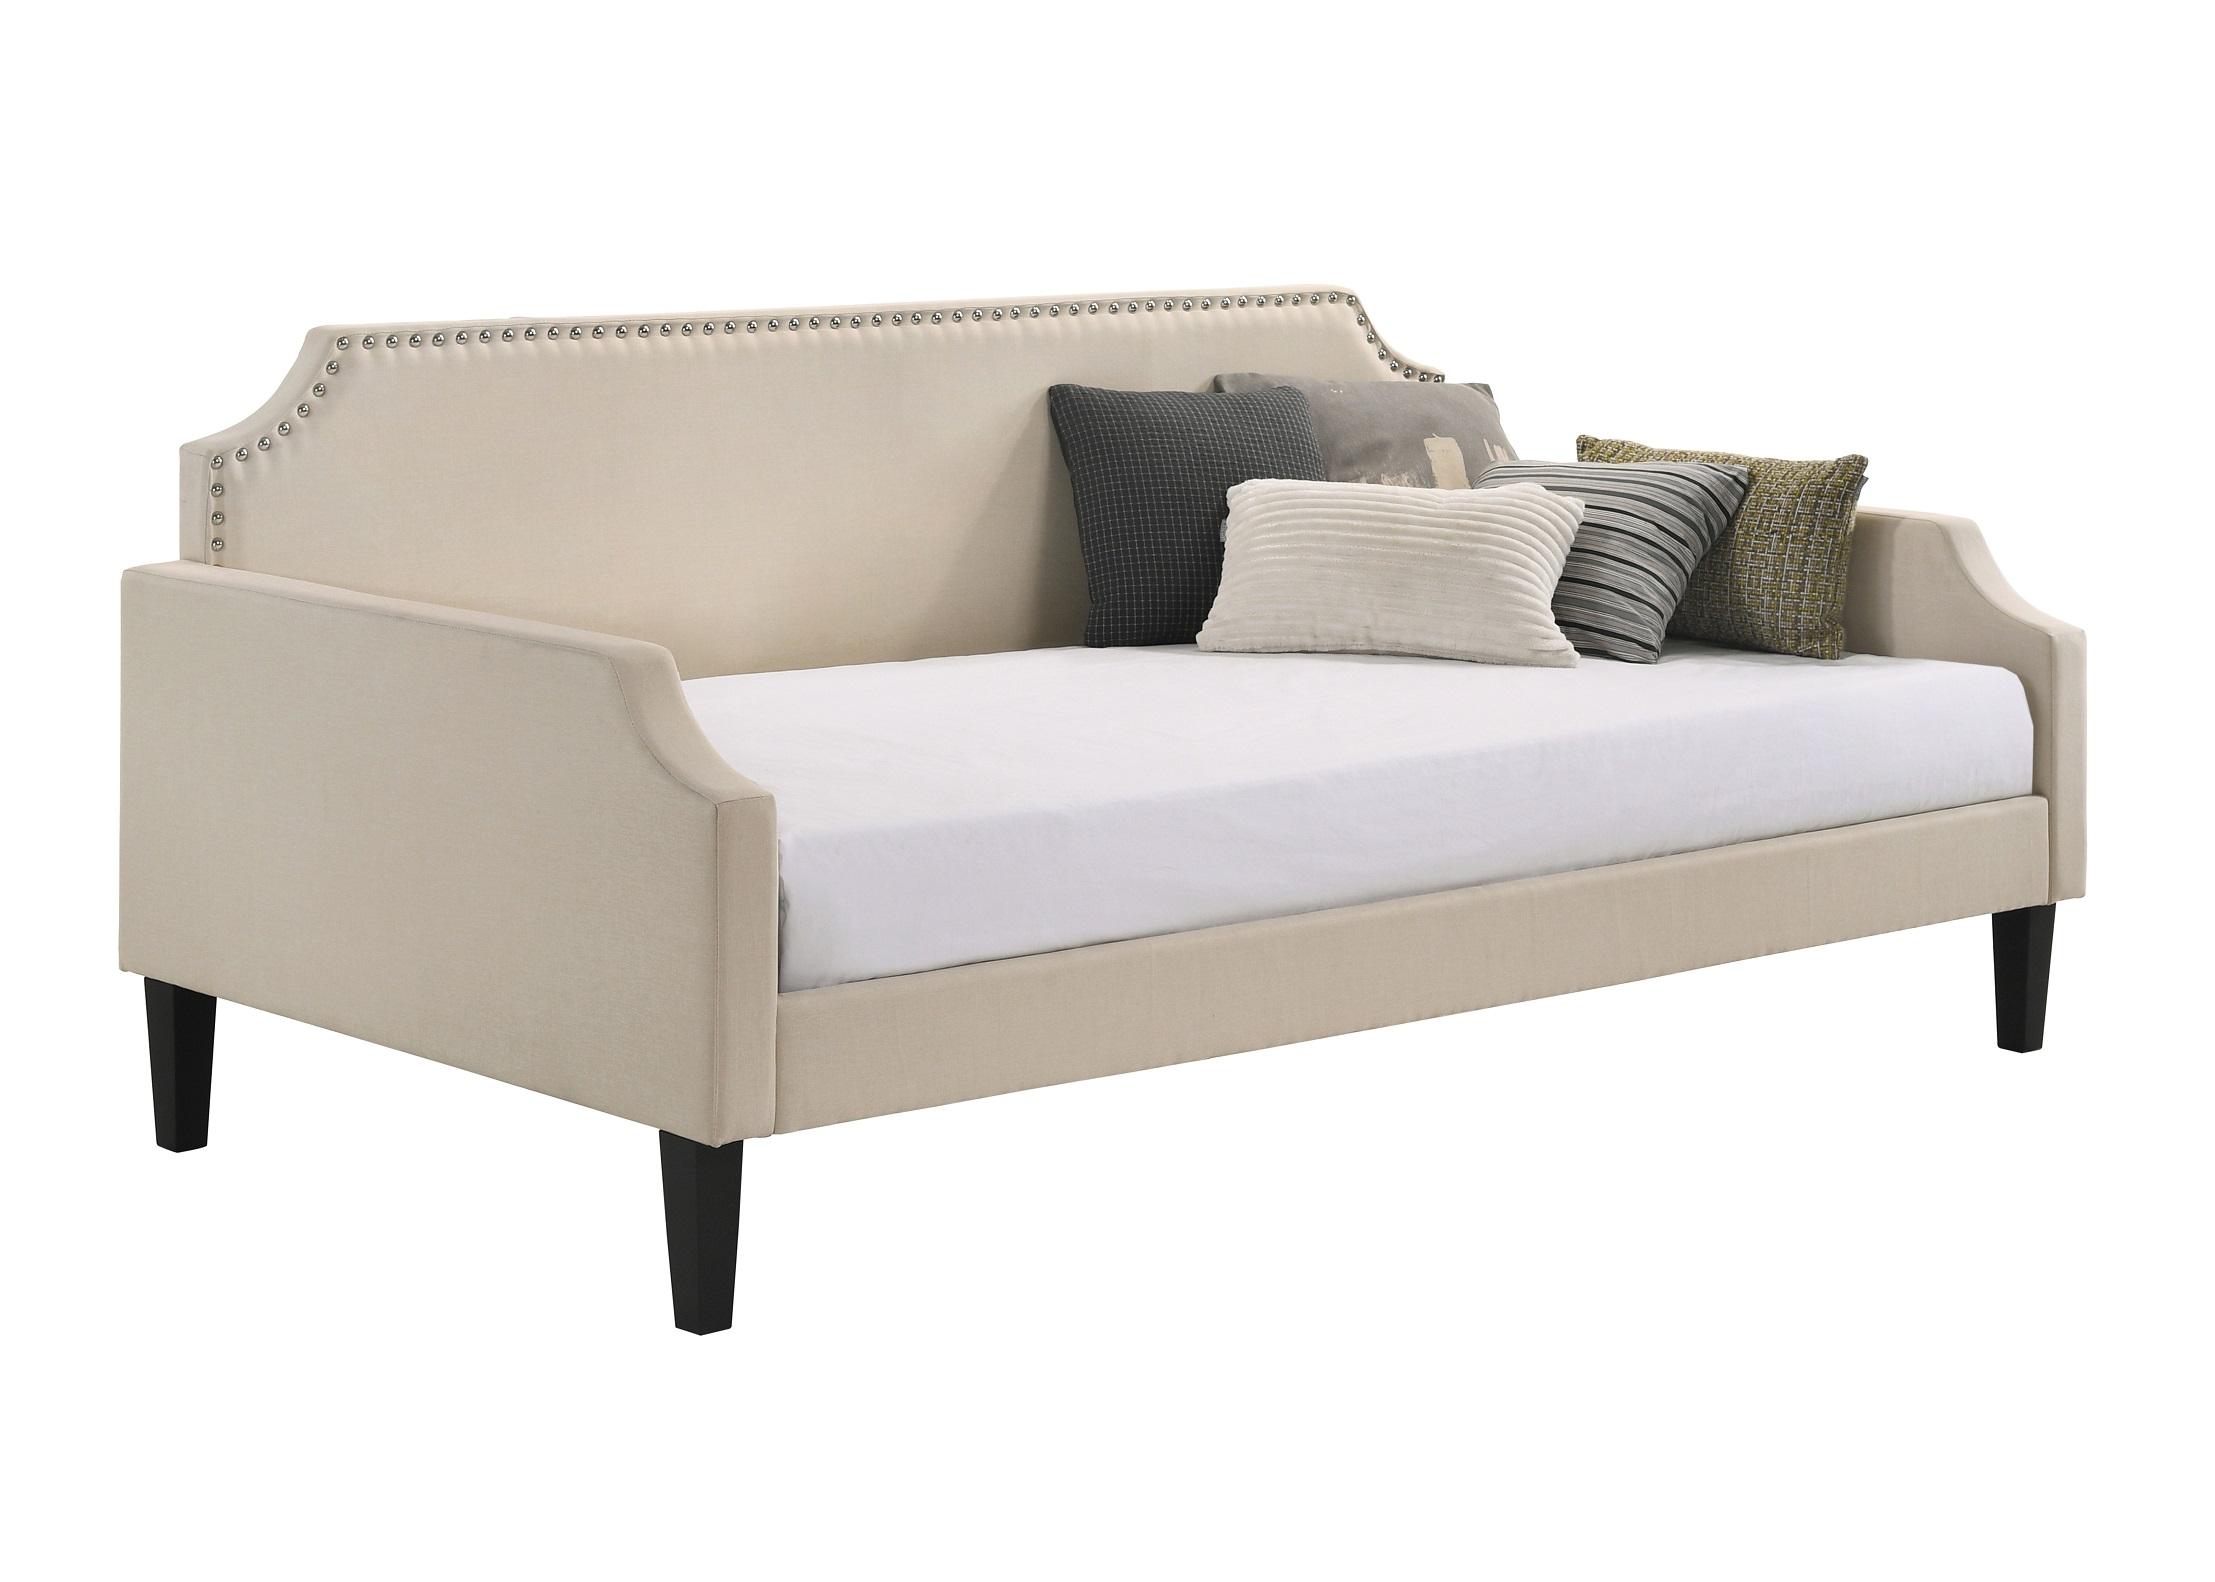 Coaster 300635 Daybed